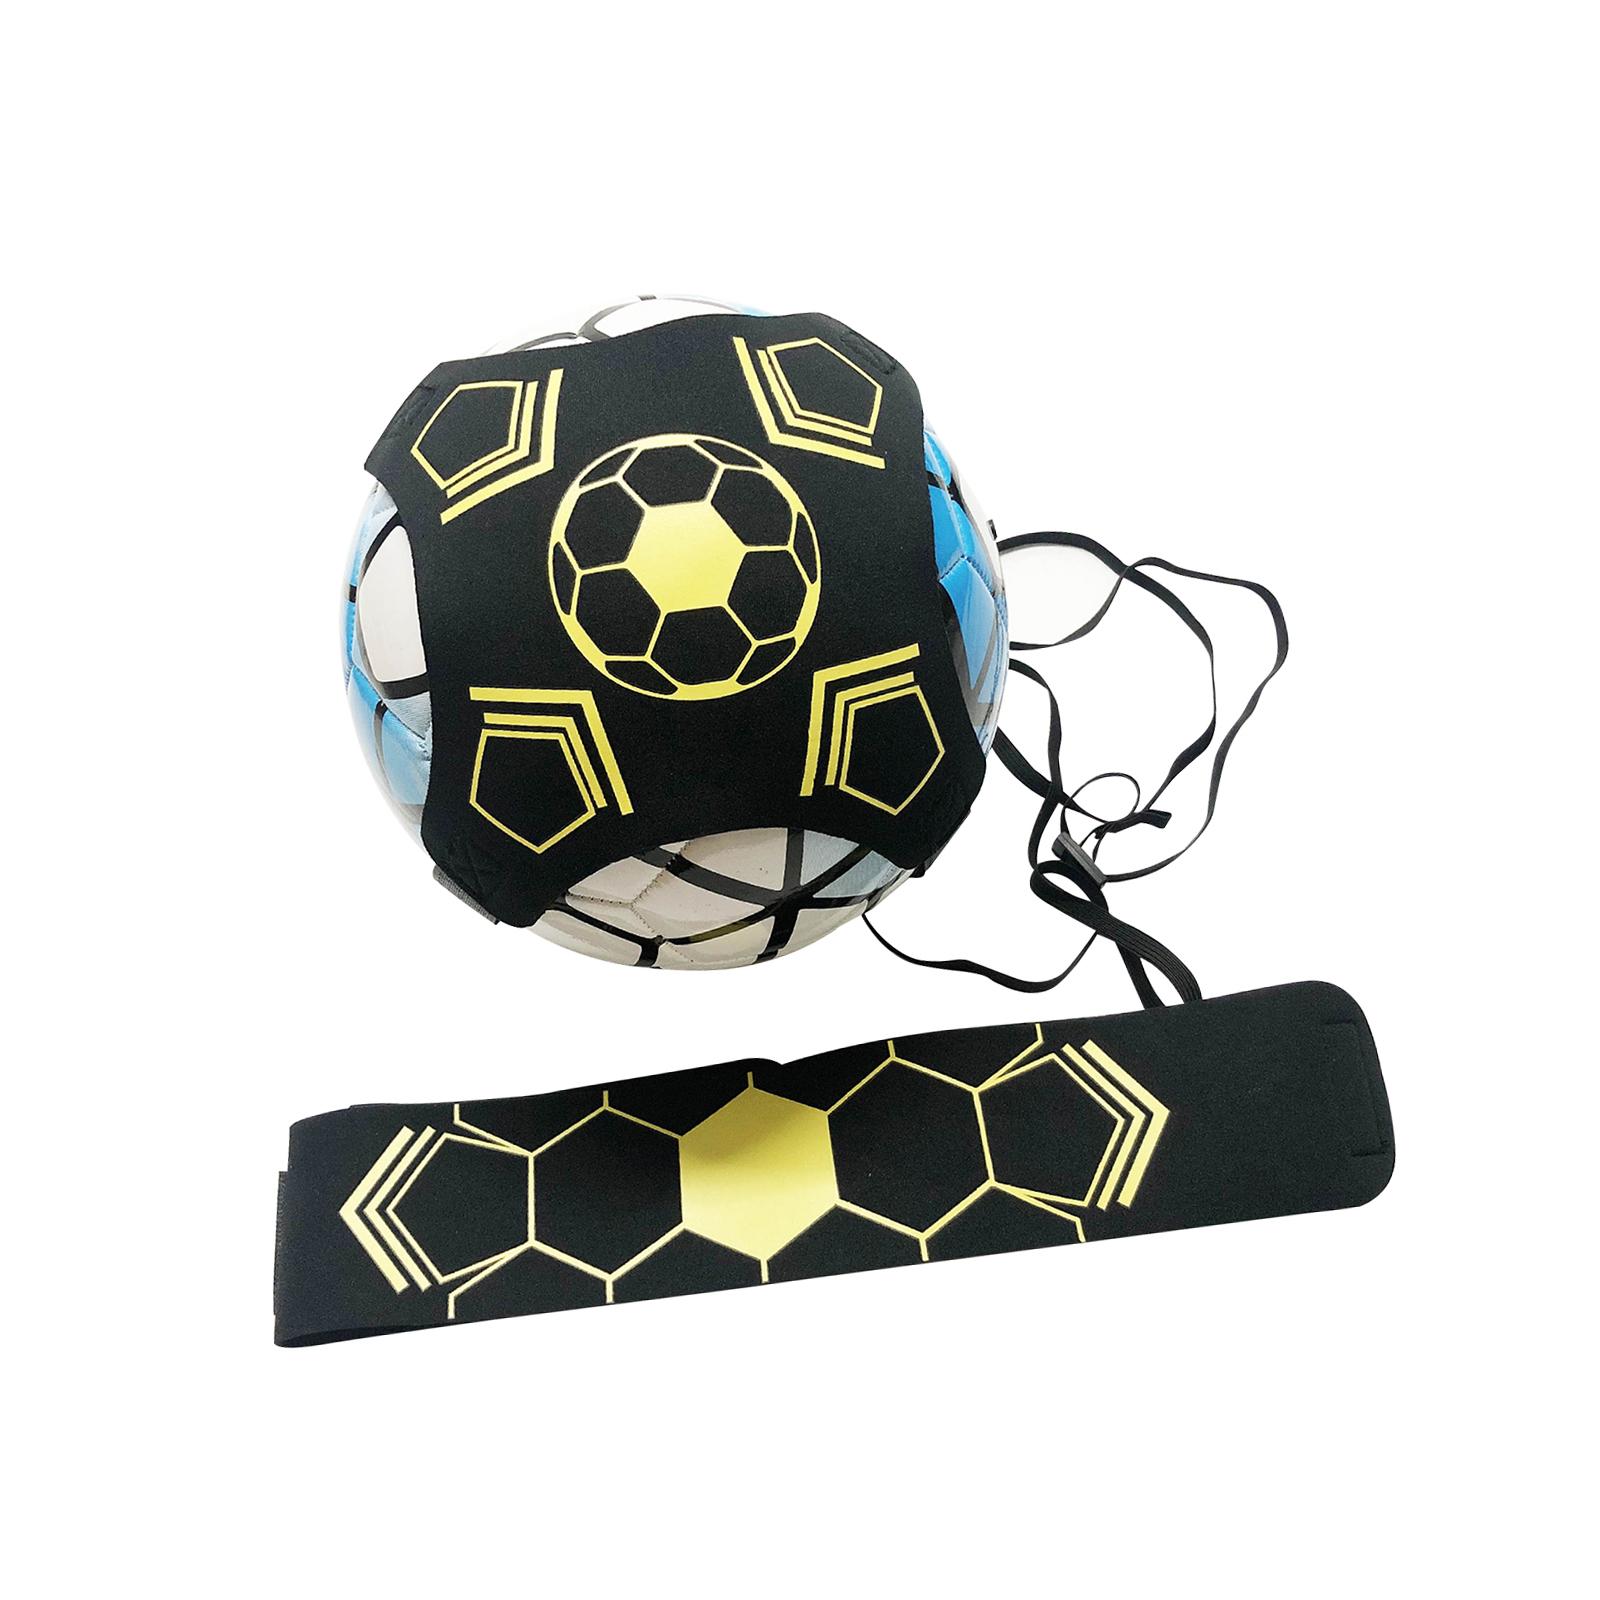 Kick Throw Solo Practice Fits Ball 3, 4,and 5 Game Ball Hands Soccer Trainer Ball